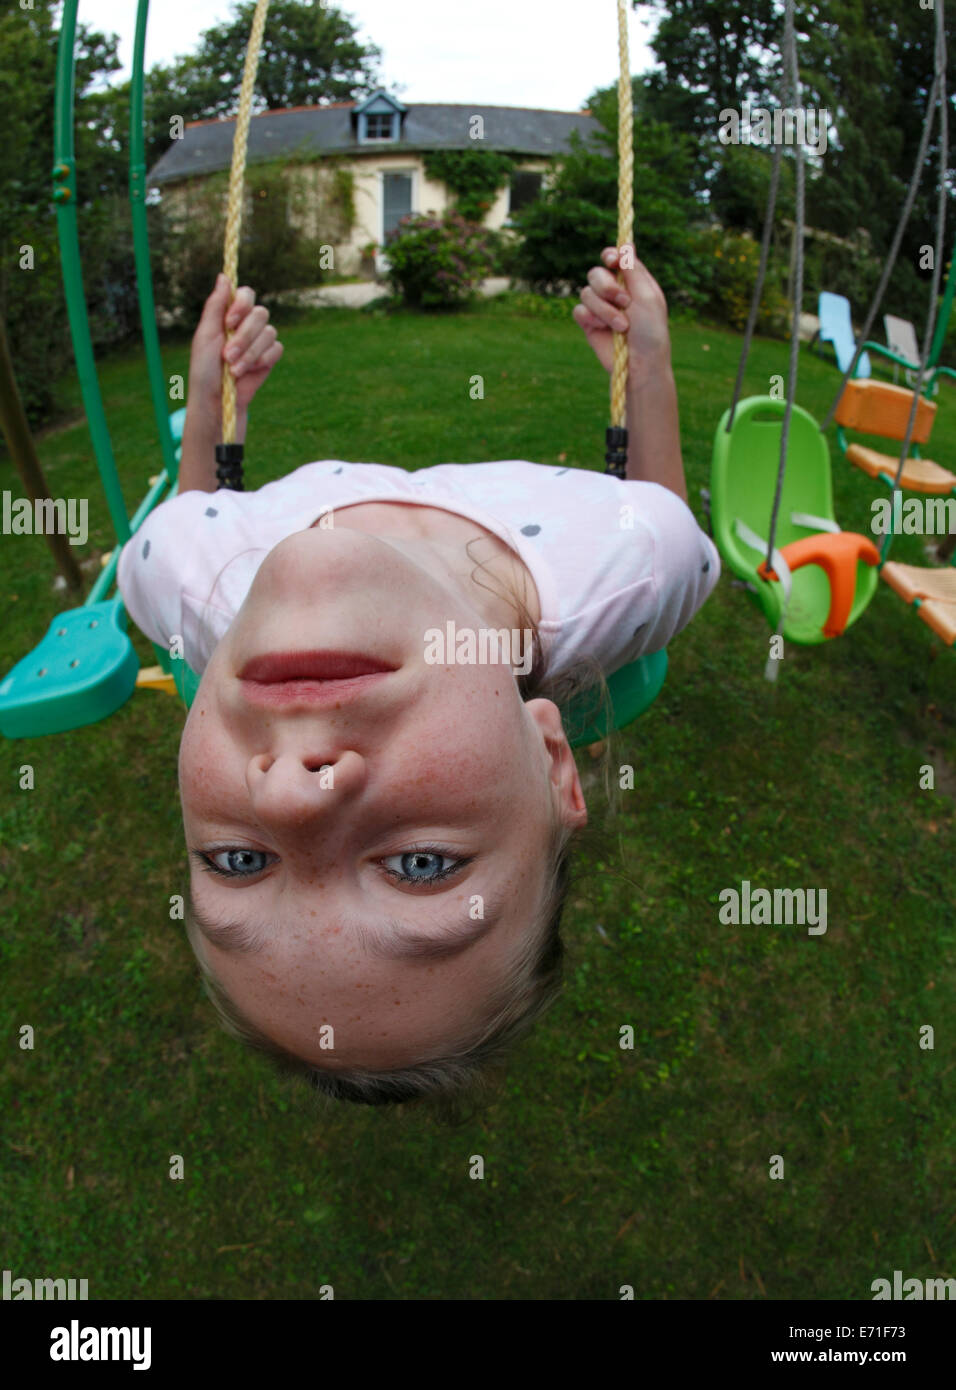 Young girl upside down on a swing Stock Photo